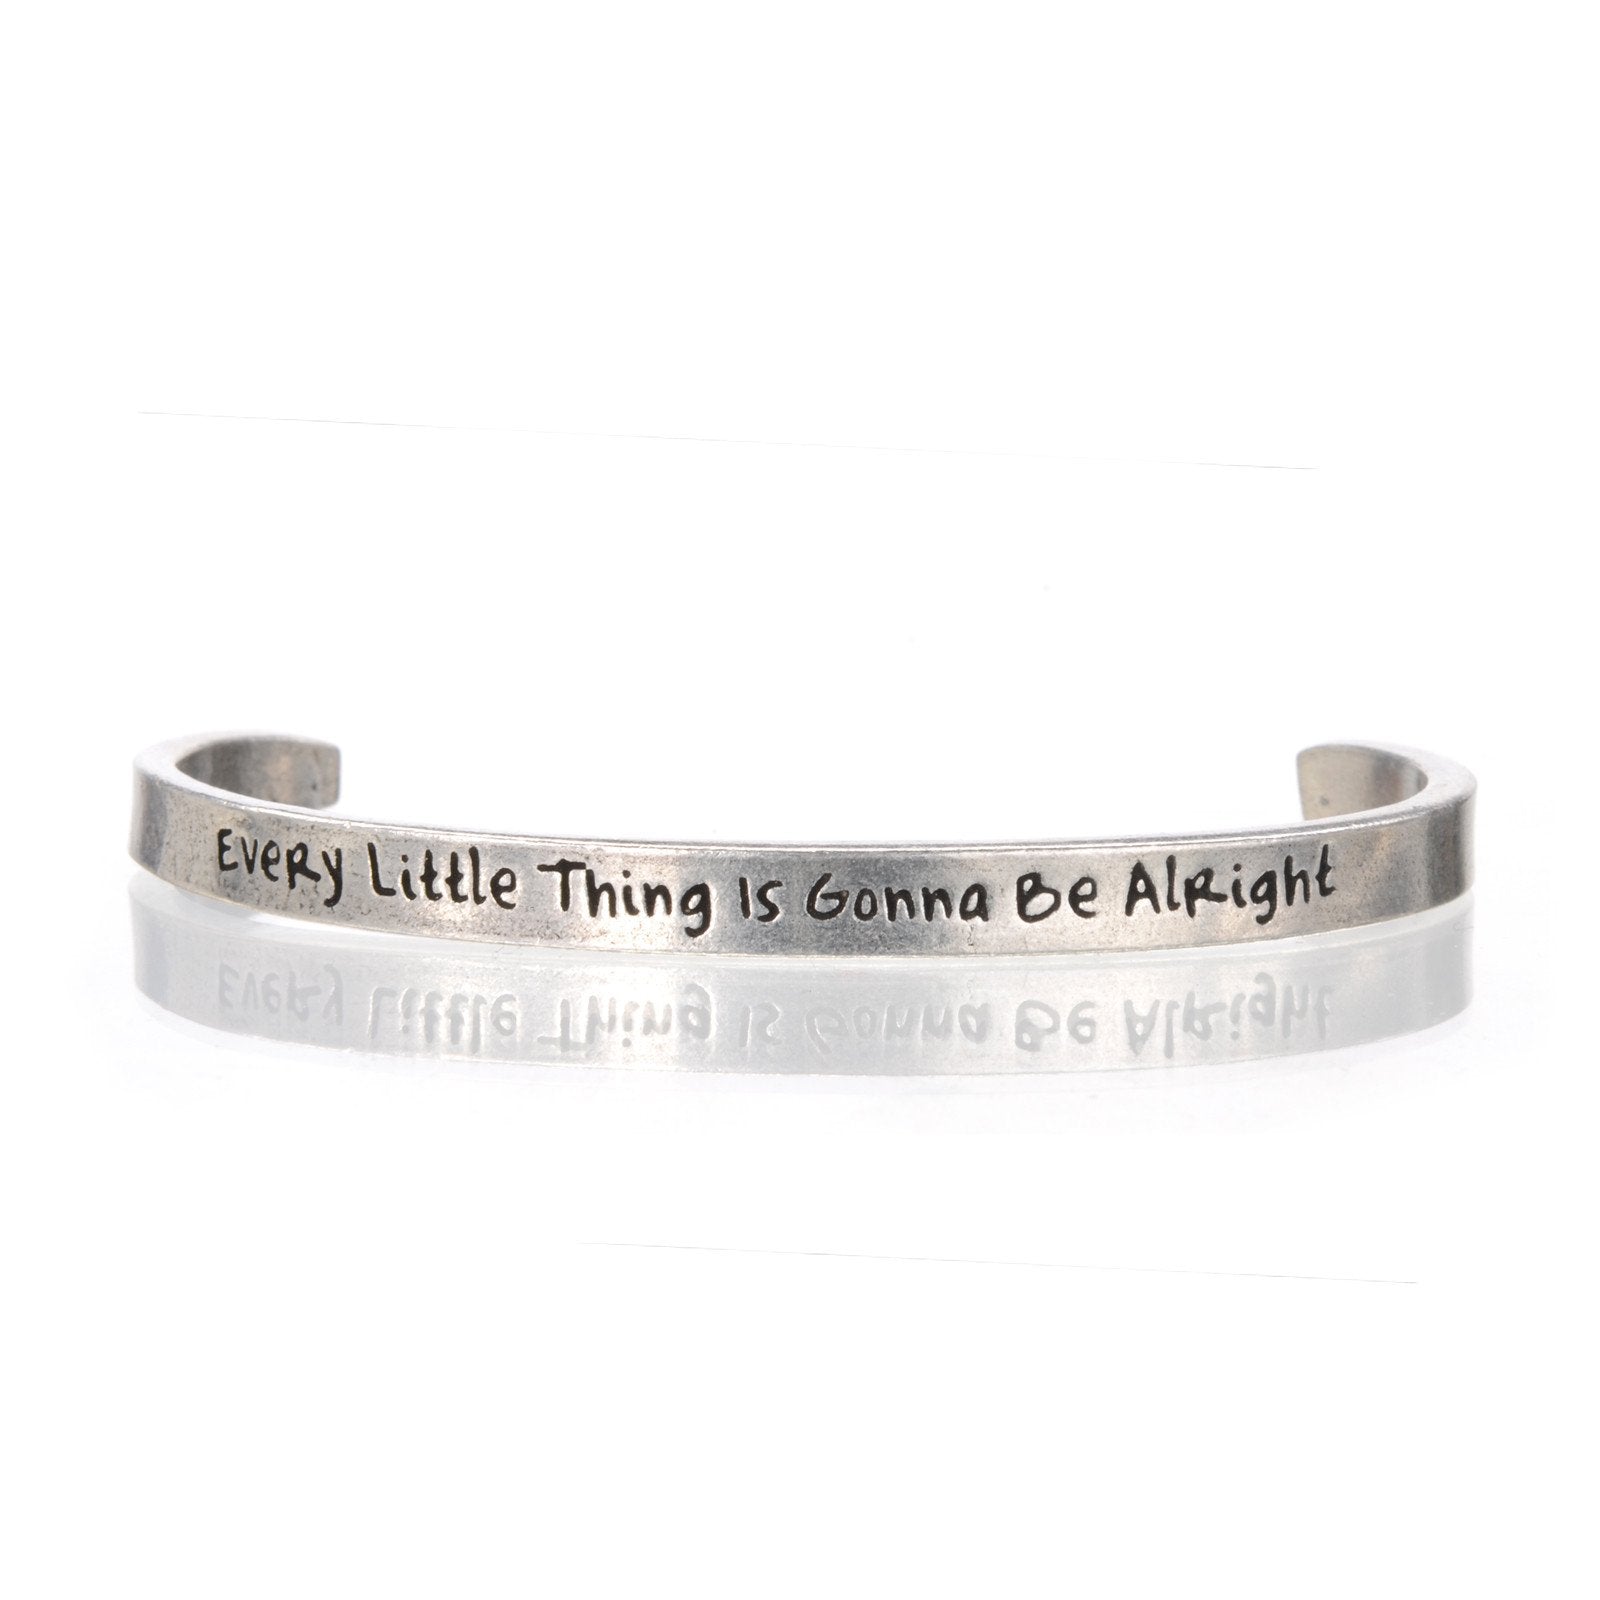 Every Little Thing is Gonna Be Alright Quotable Cuff Bracelet